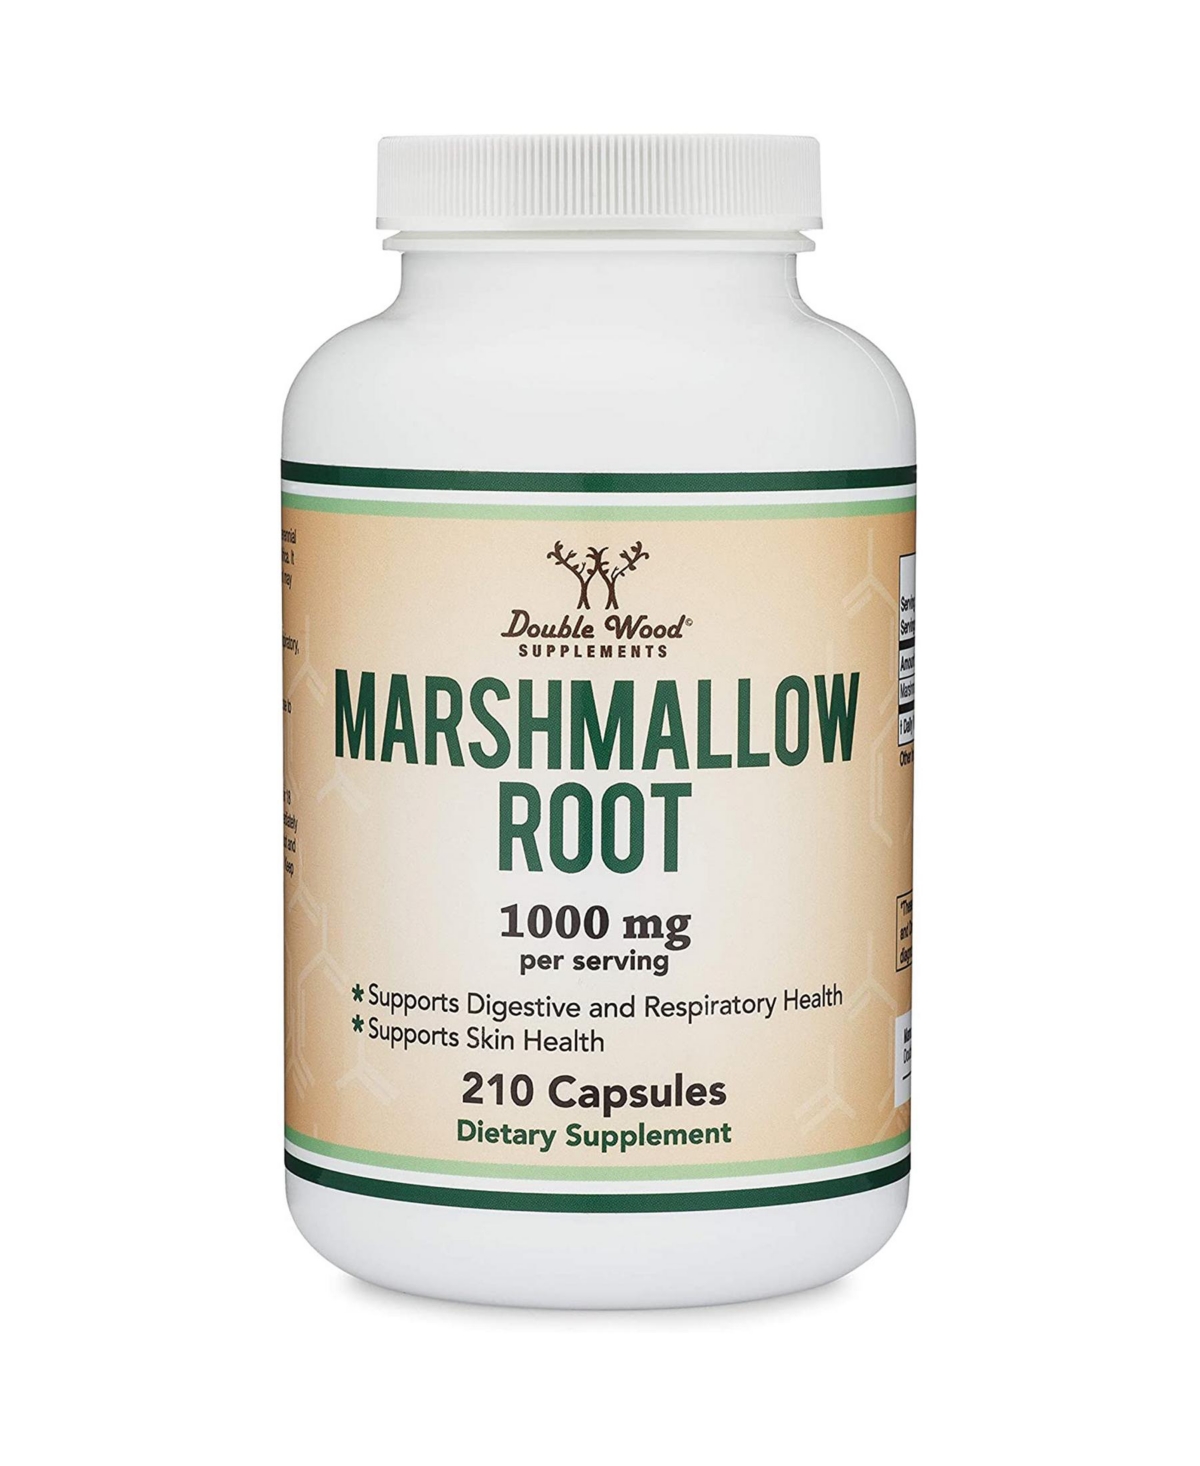 Marshmallow Root - 210 capsules, 1000 mg servings